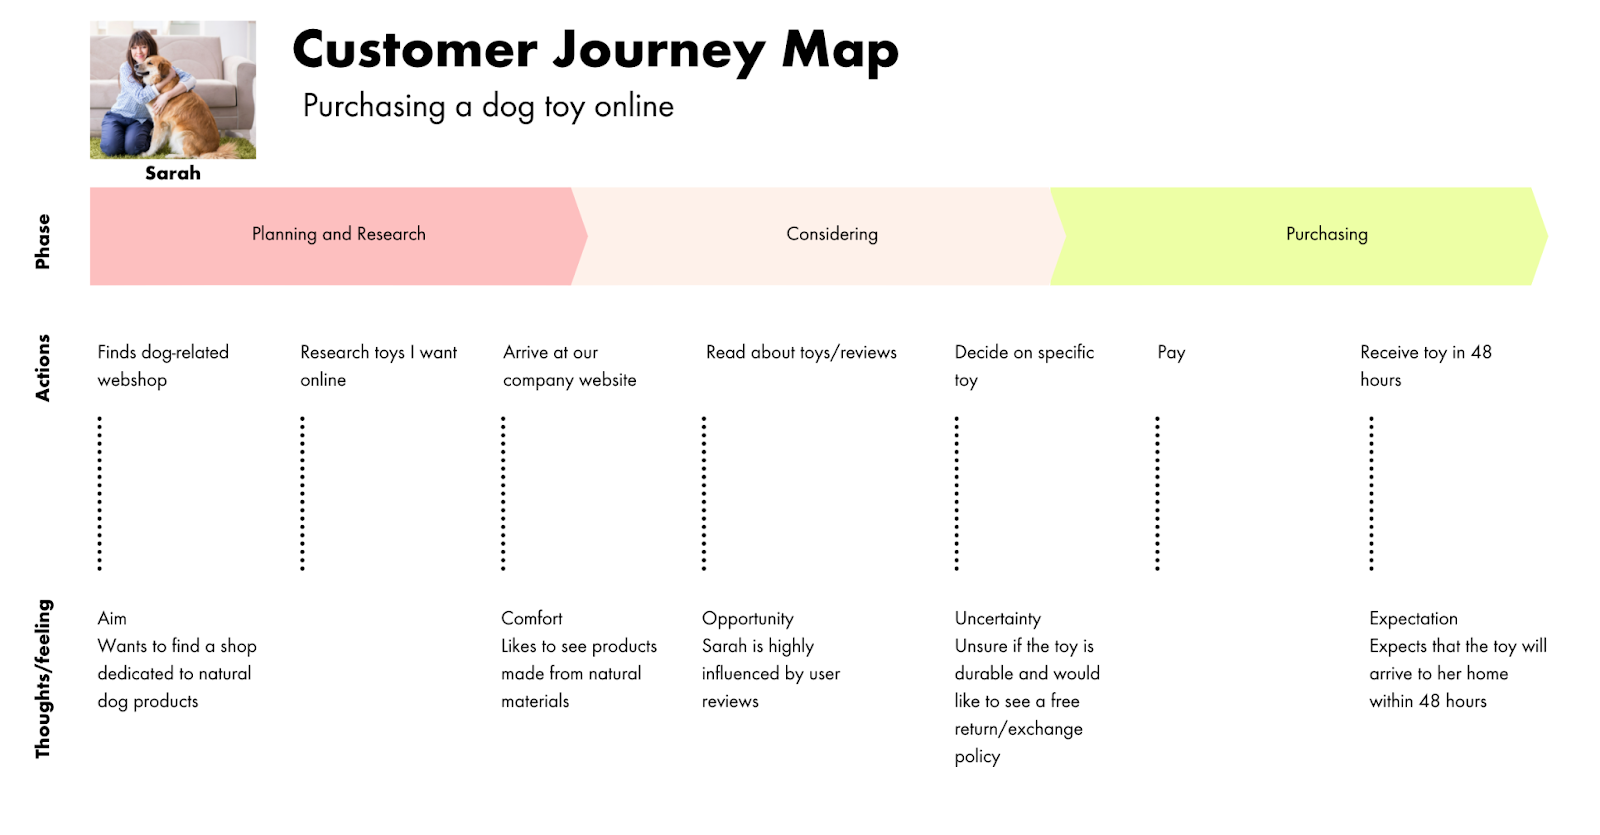 The Journey Map for sara, a potential customer that is simplified to show actions and feelings